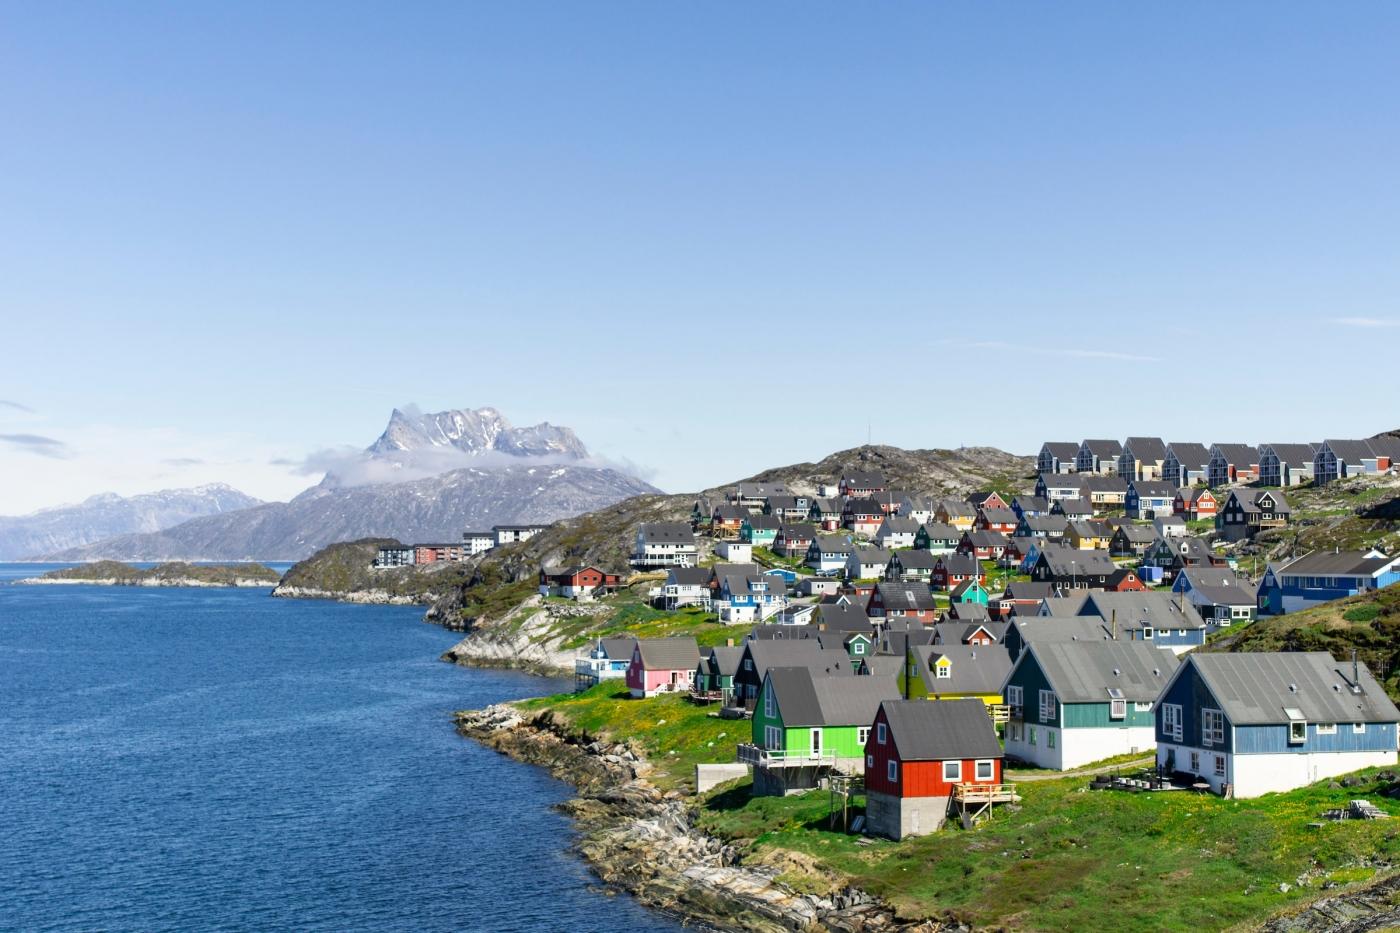 Colourful Nuuk. Photo by Stine Selmer Andersen - Visit Greenland